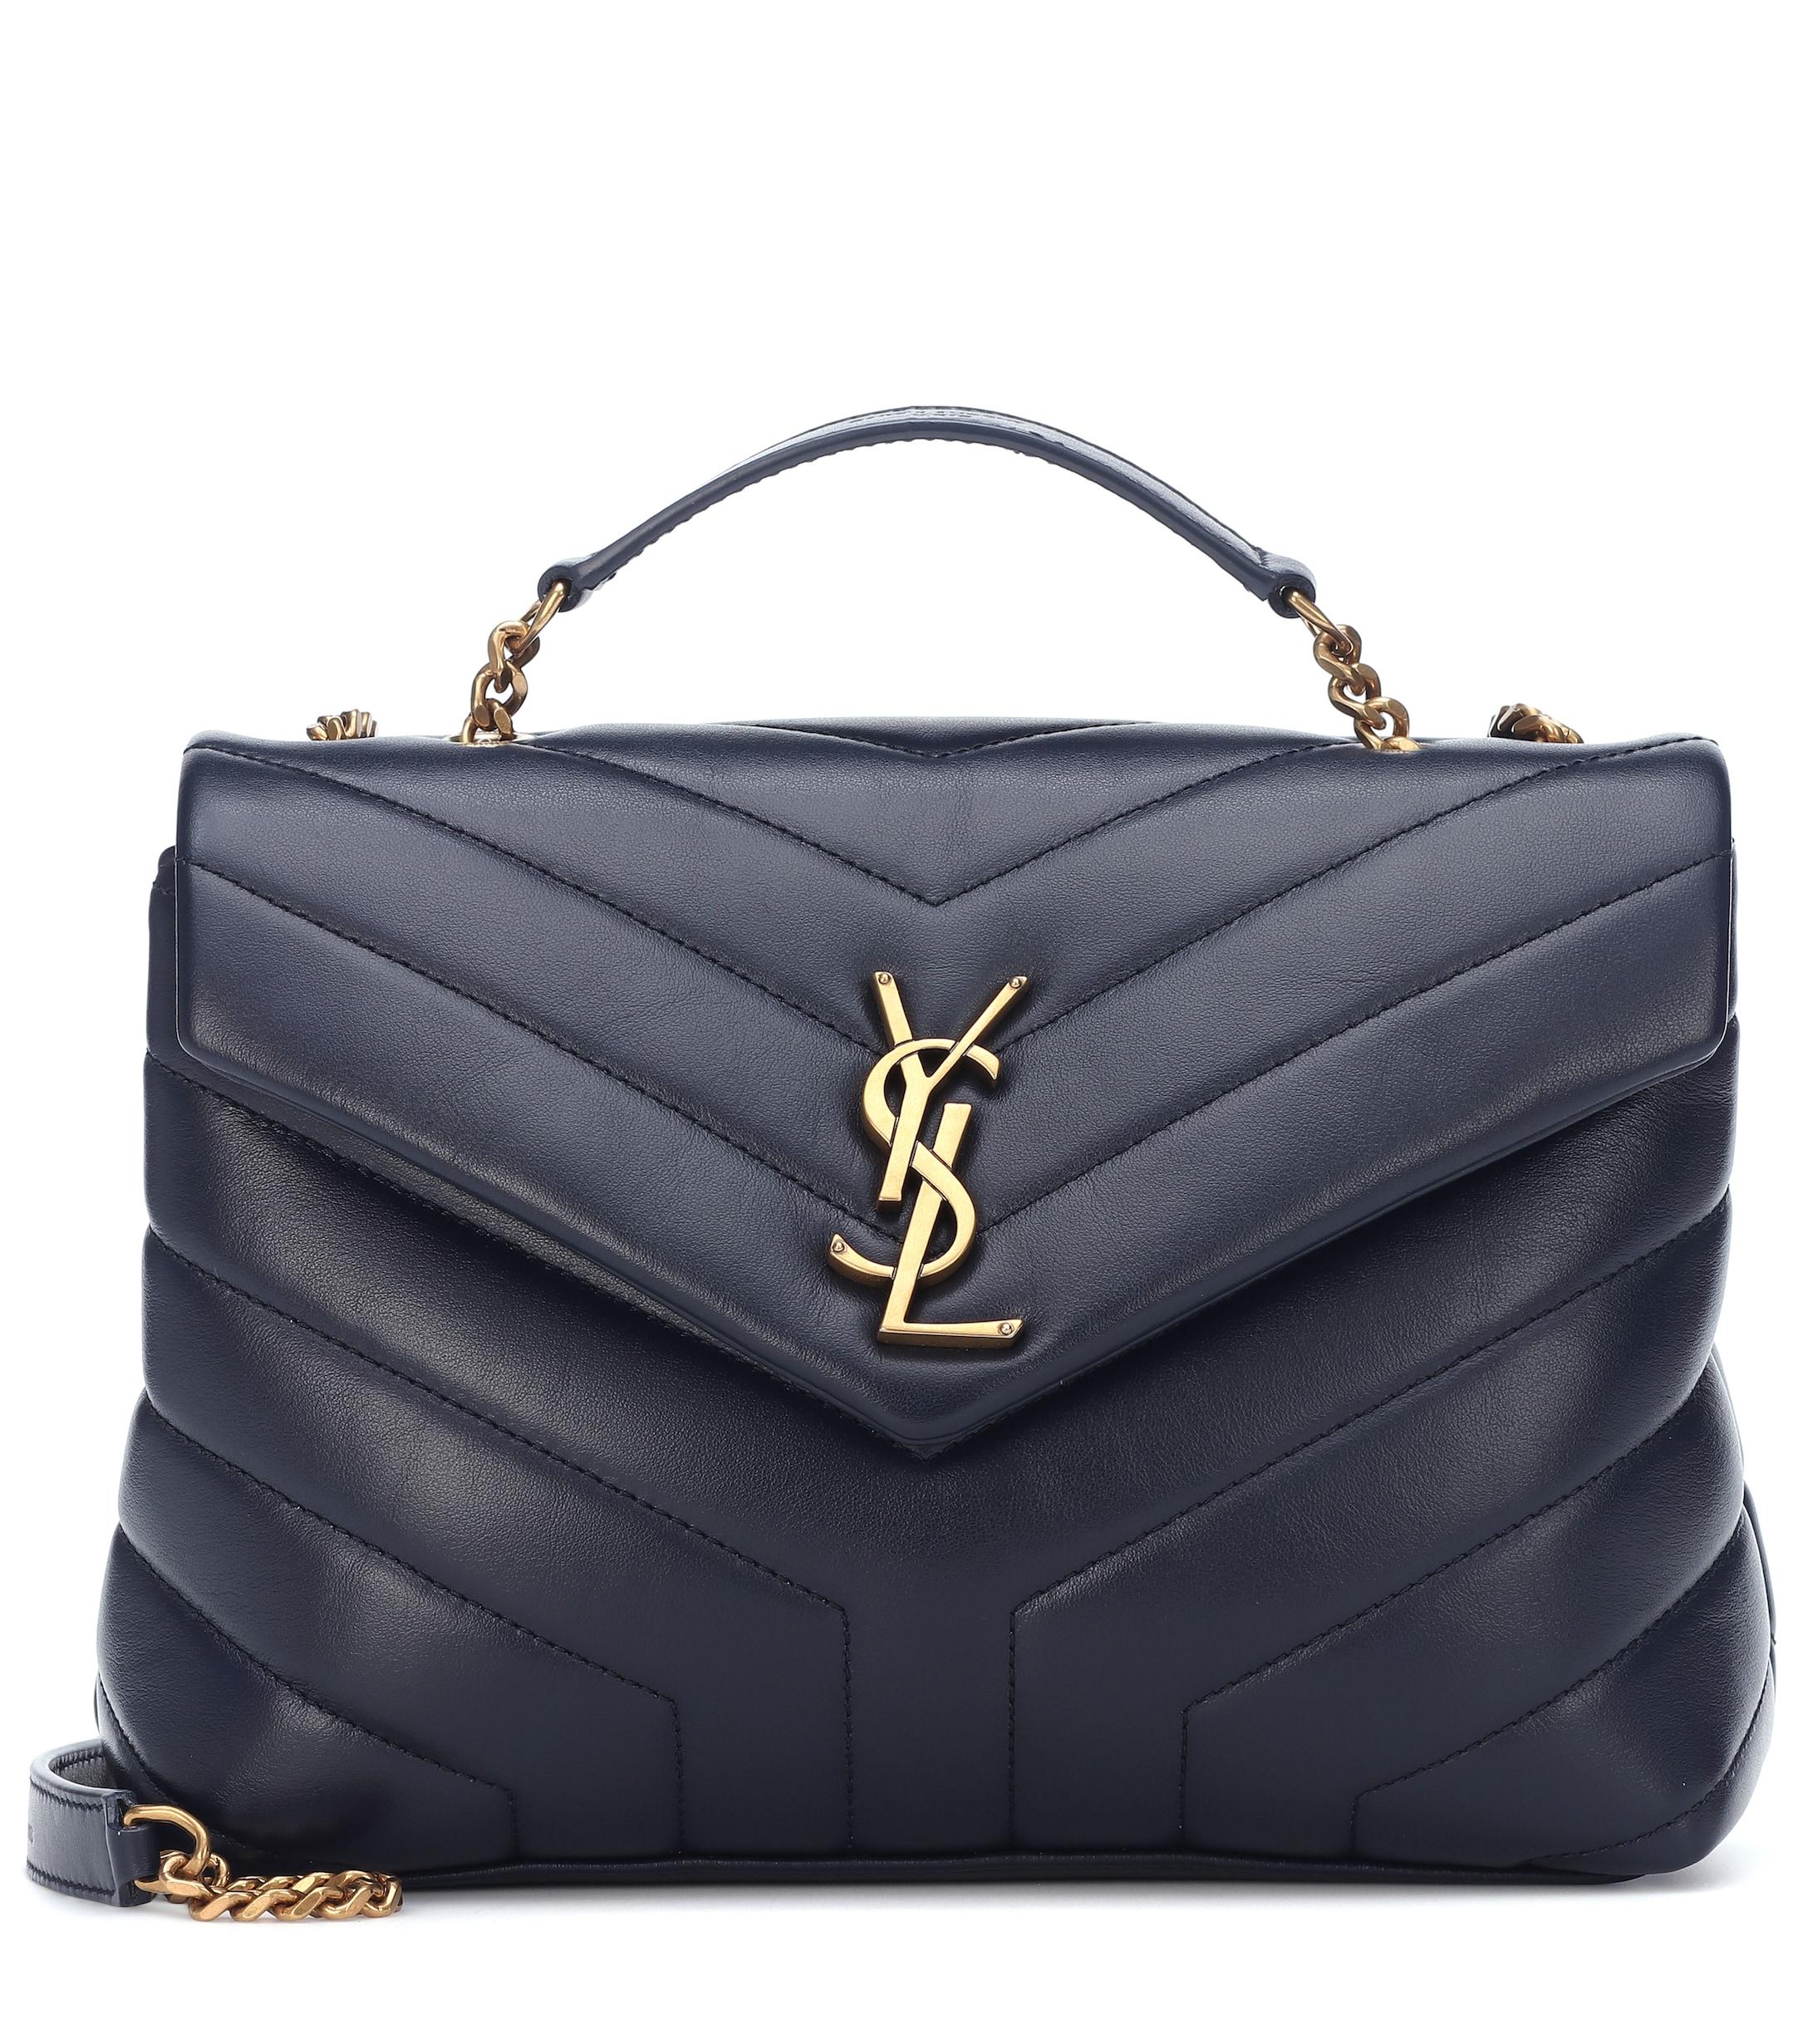 Saint Laurent Loulou Small Leather Shoulder Bag in Blue - Lyst